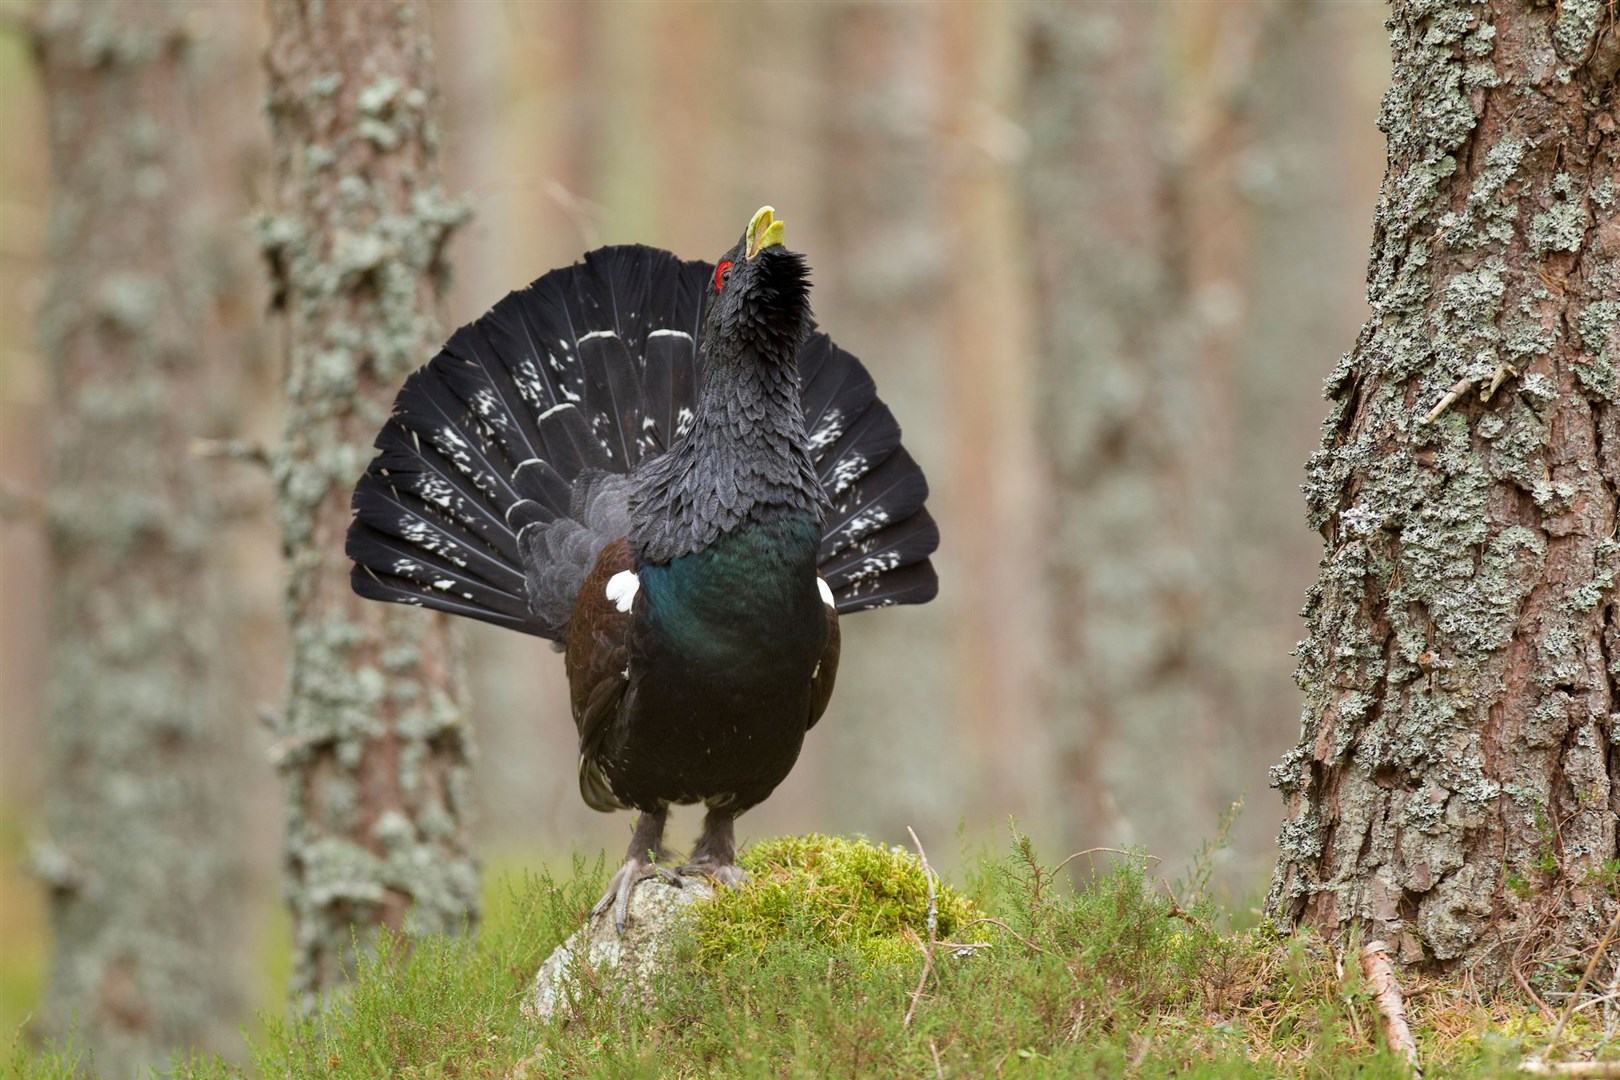 Capercaillie (Tetrao urogallus) adult male displaying in a pine forest in the Cairngorms National Park.